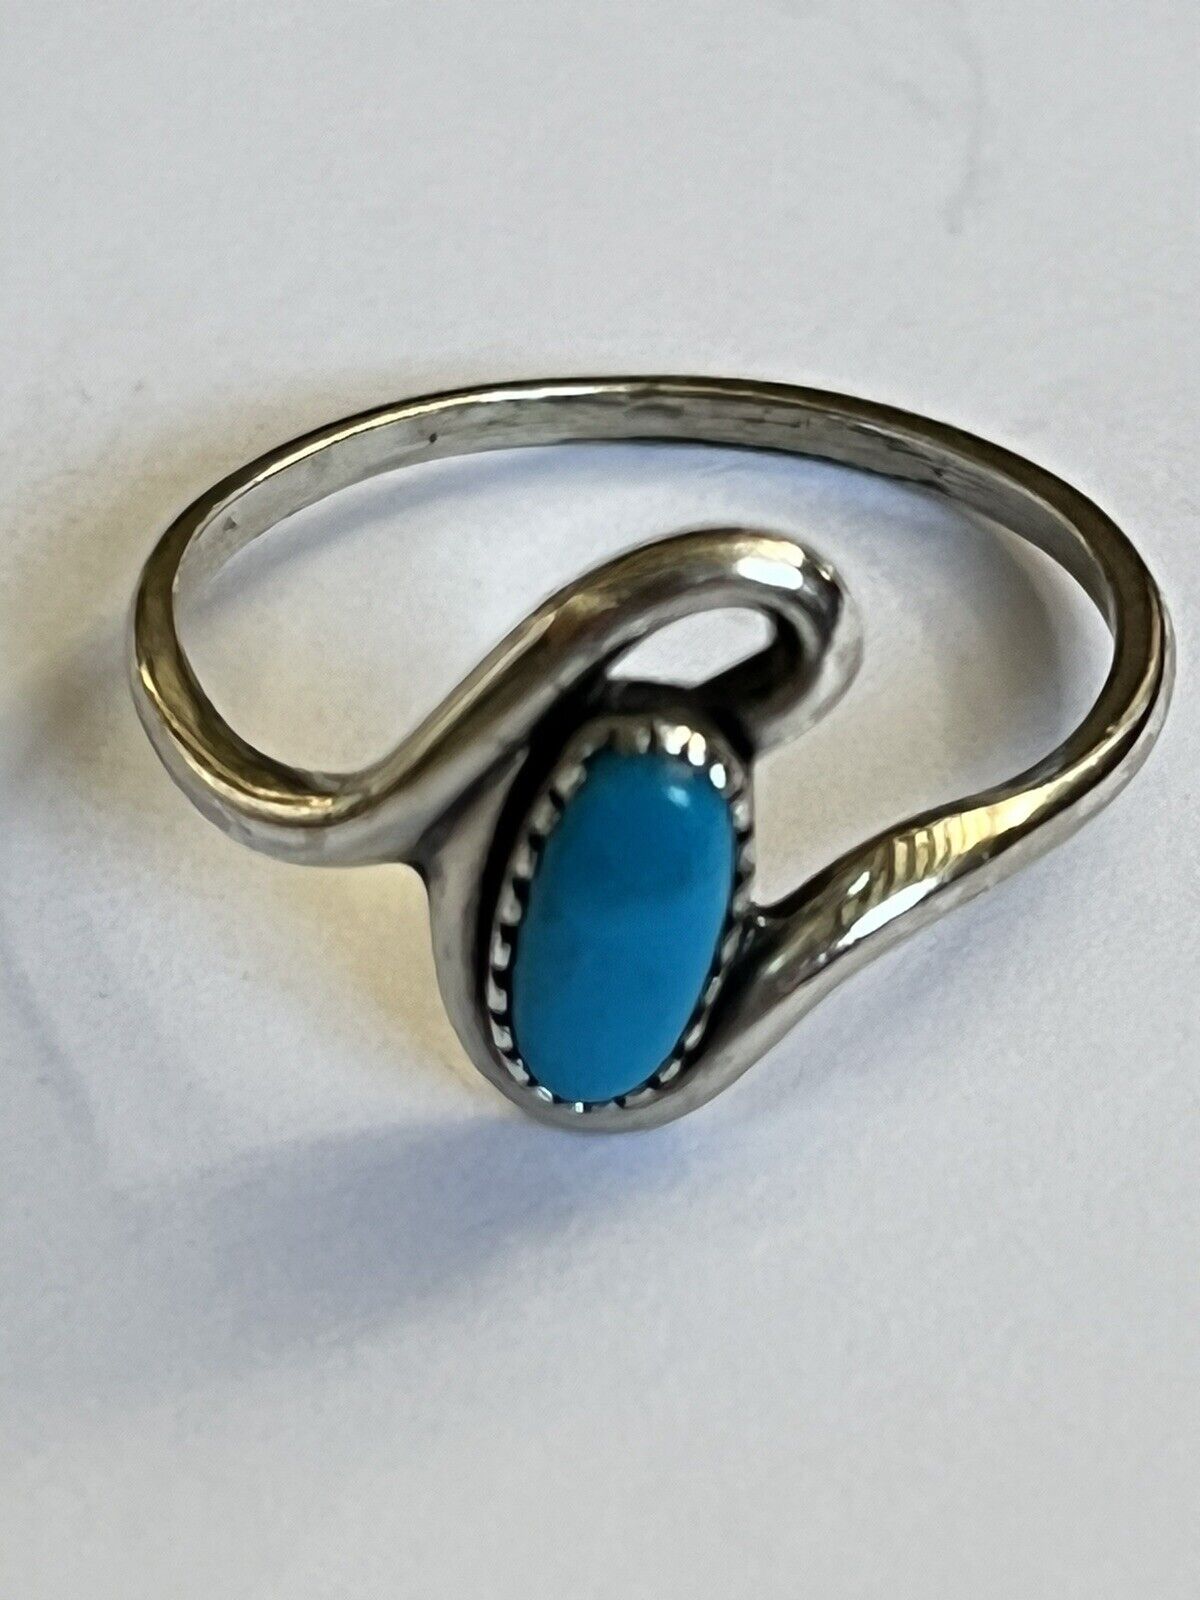 Vintage Silver 925 Turquoise Ring Size N